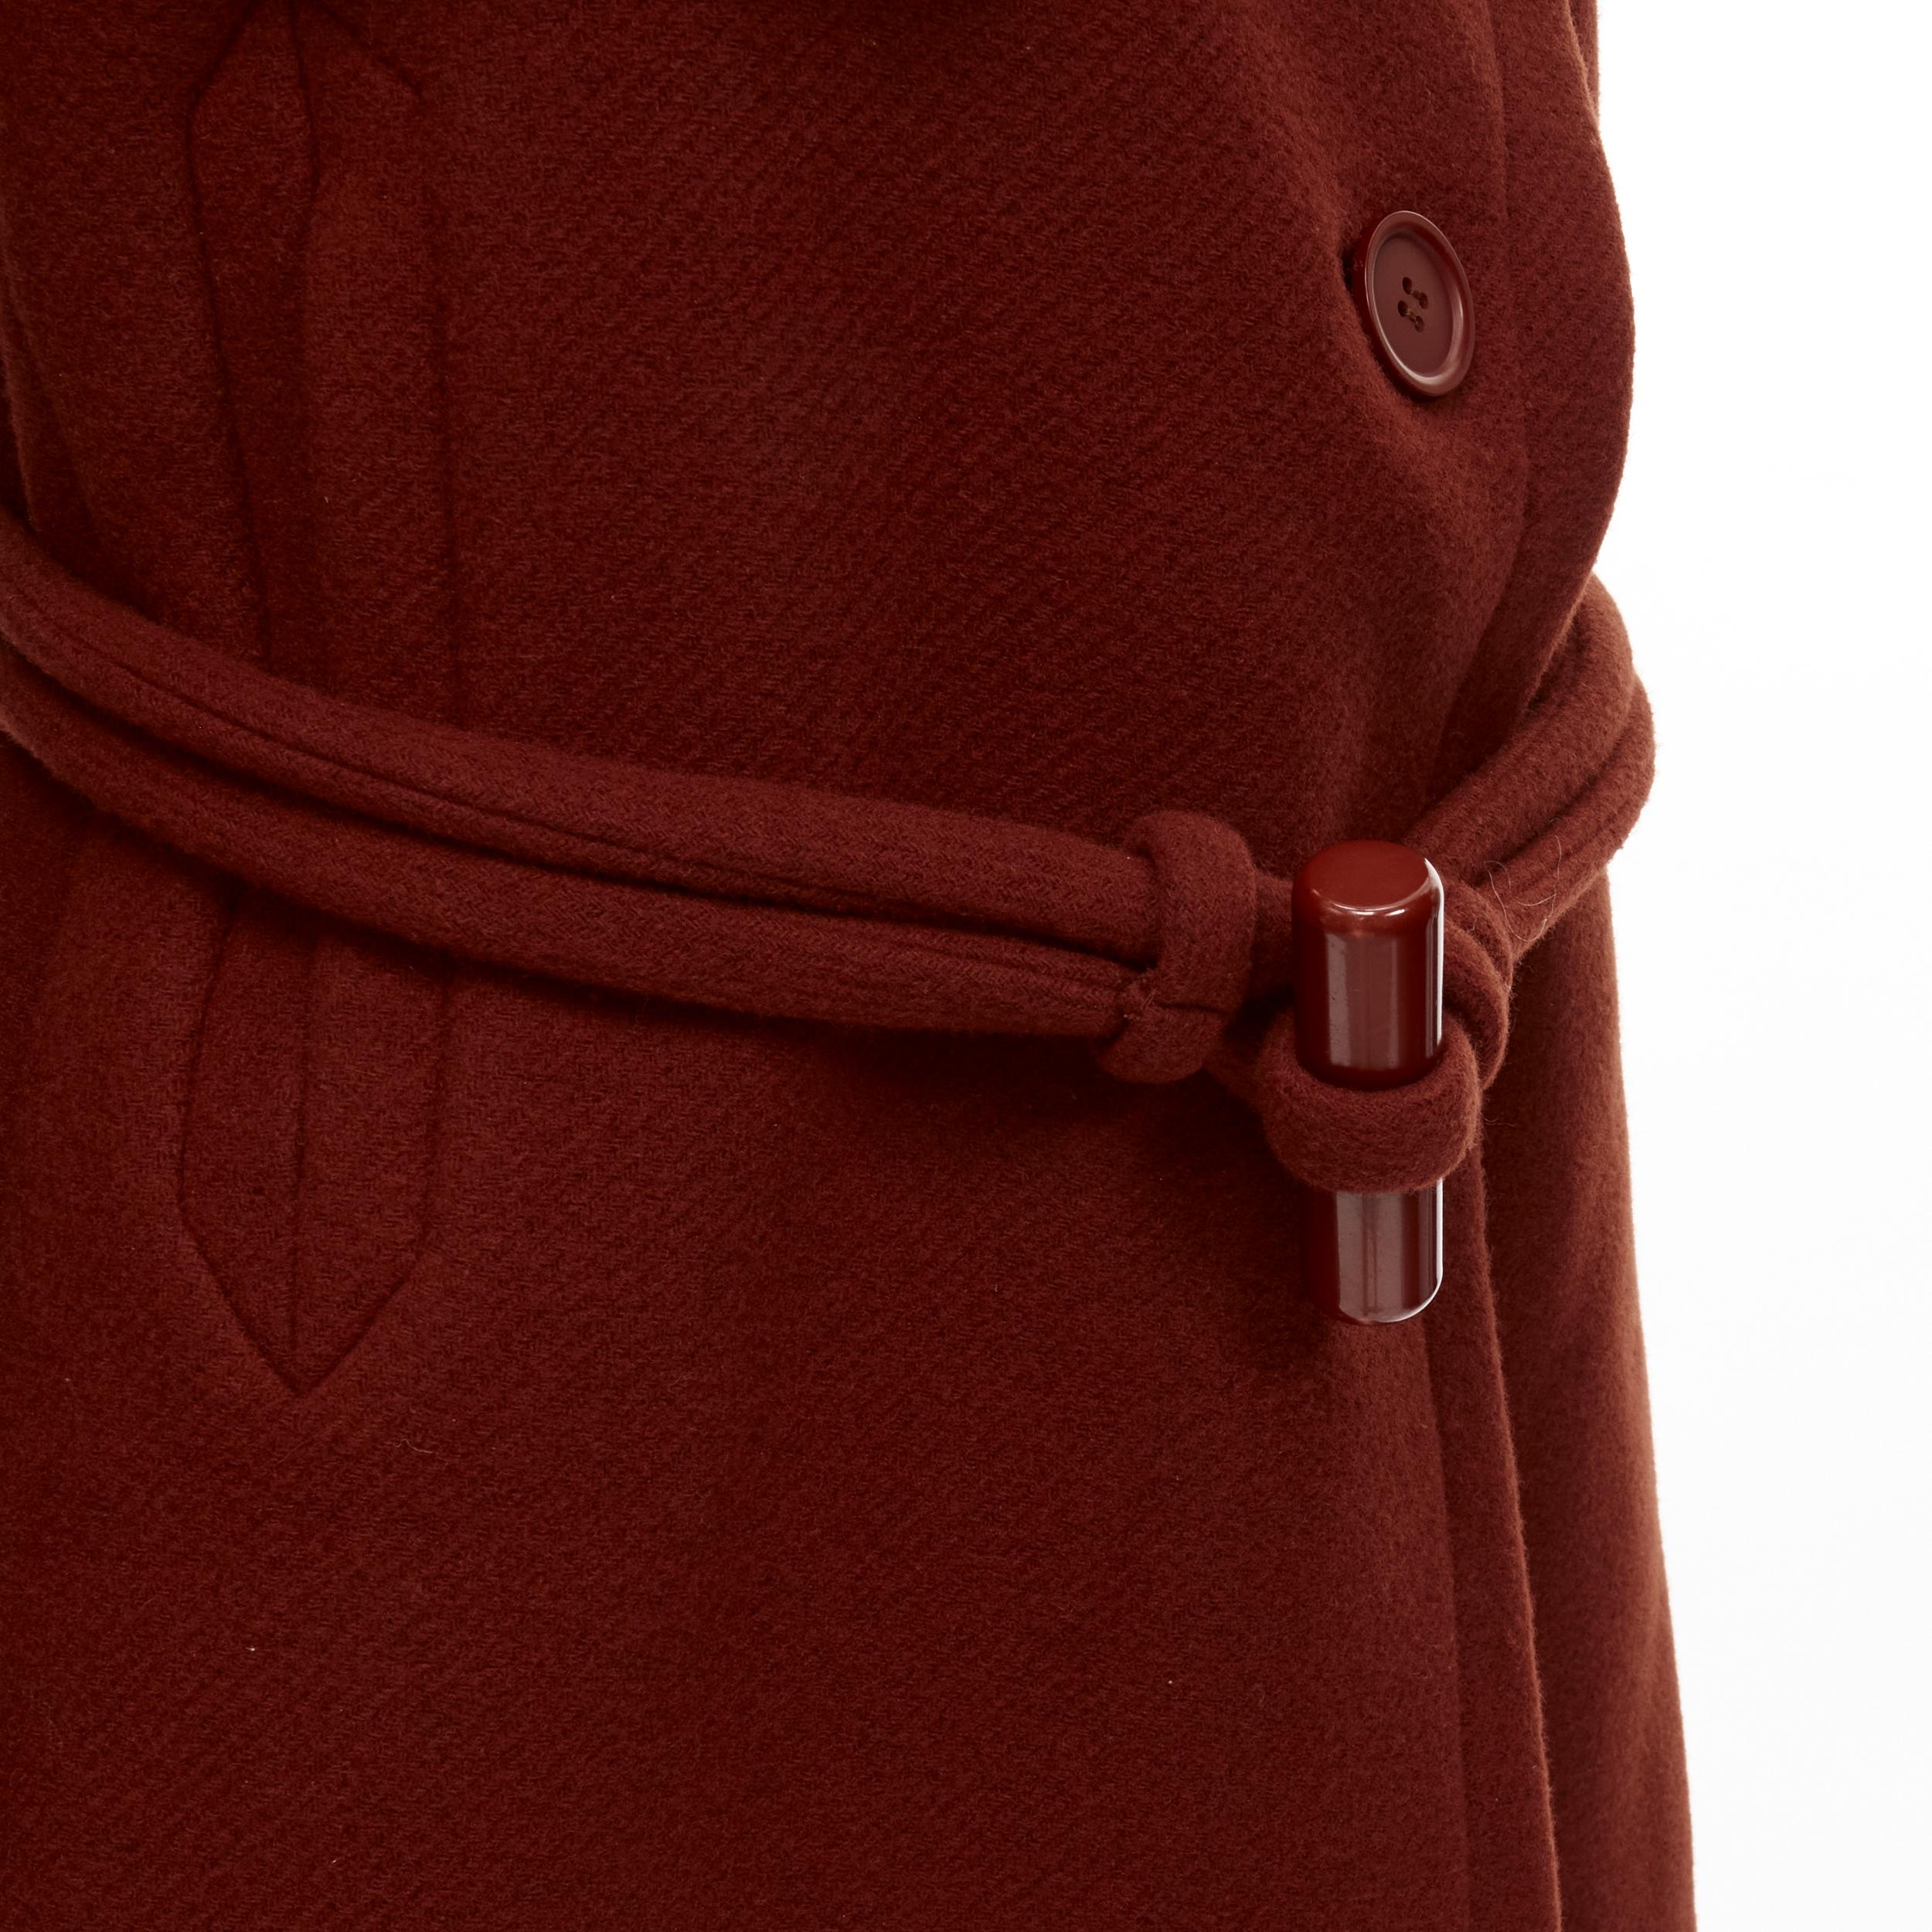 CHLOE 2015 brick red wool toggle belt long coat FR38 M
Brand: Chloe
Collection: Pre Fall 2015 
Material: Wool
Color: Red
Pattern: Solid
Closure: Button
Extra Detail: Pre-Fall 2015 collection. Terracotta red/brown wool fabric. Dual side pockets.